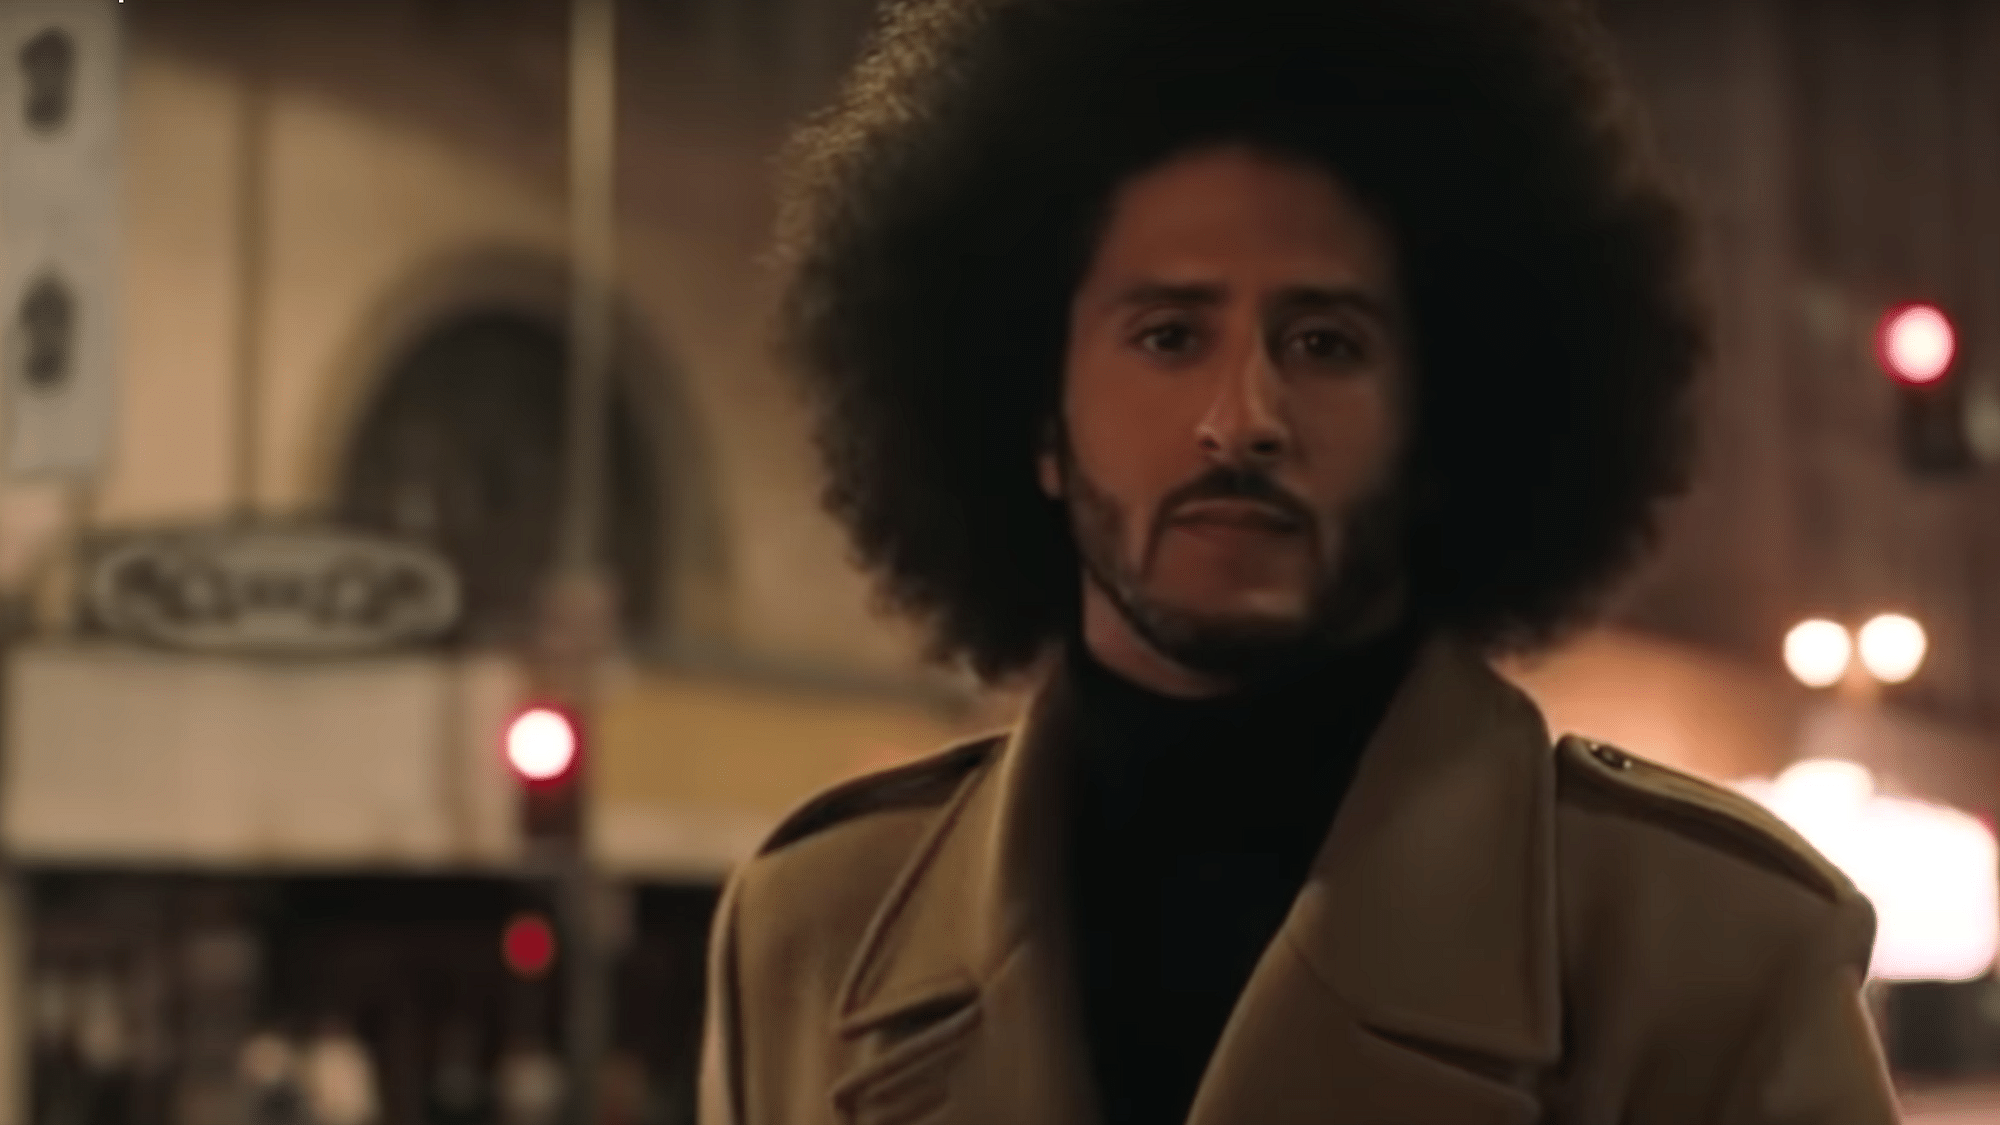 Colin Kaepernick is an NFL player who hasn’t played a season since 2016 after staging a protest during the American national anthem before a game.